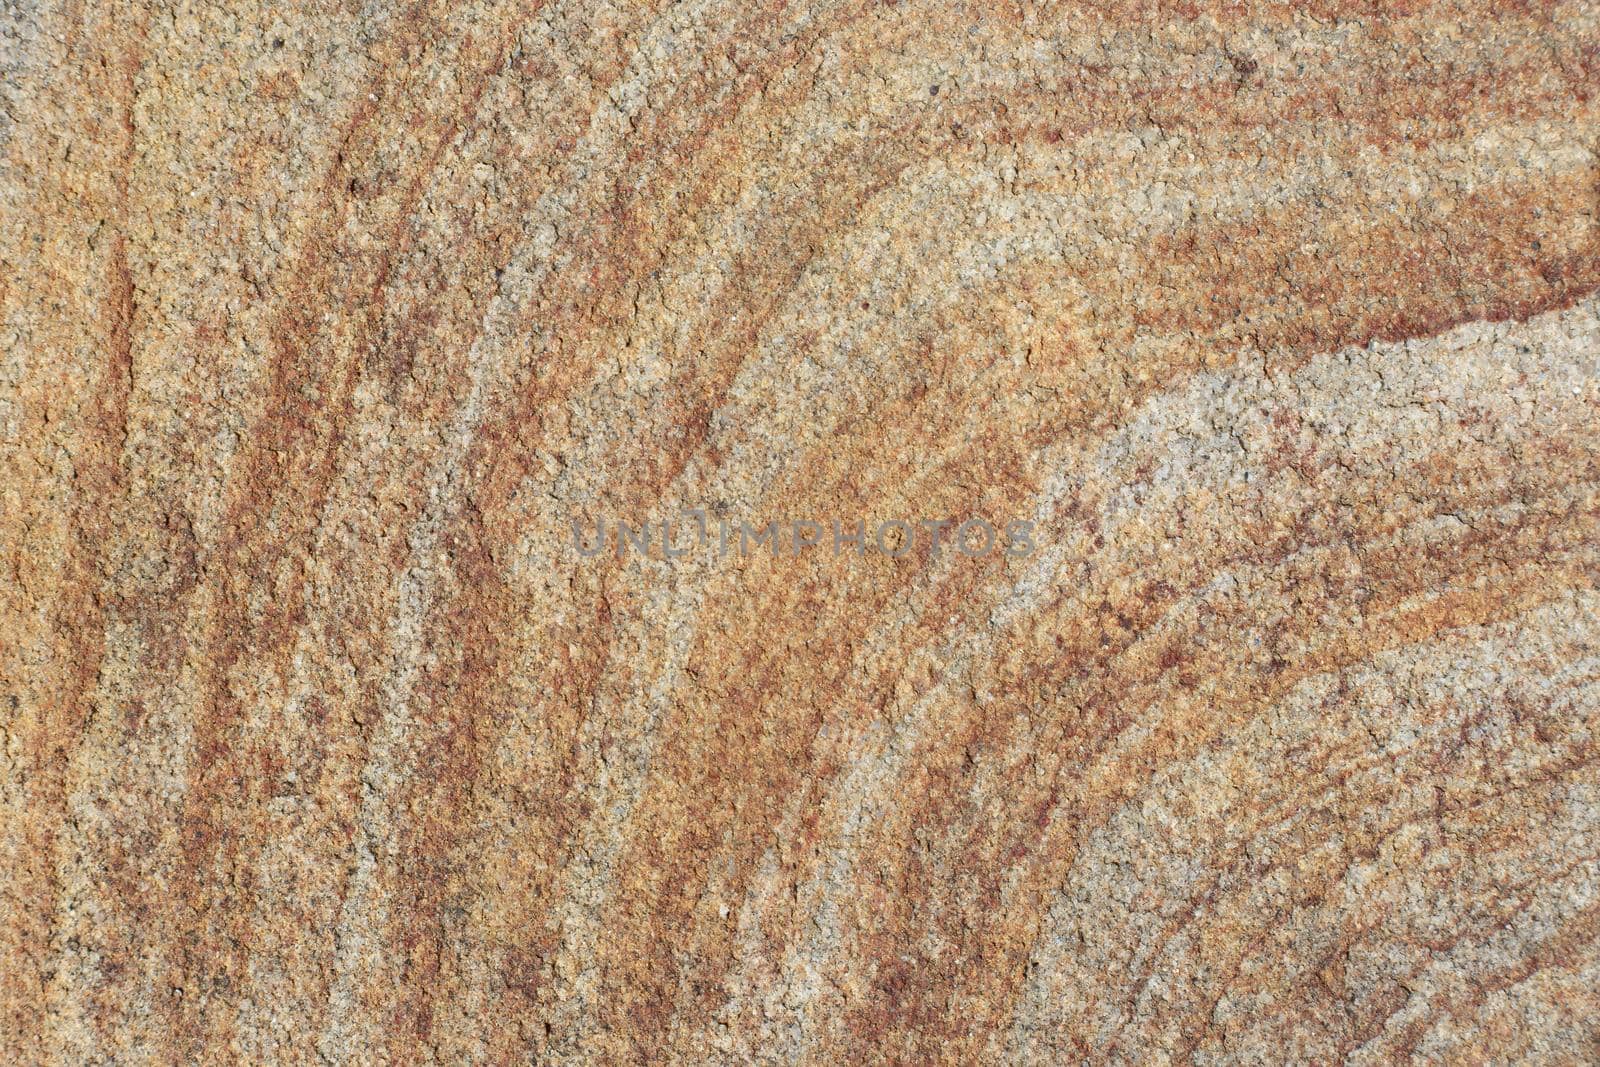 Natural bright stone texture with stripes. Rough textured rock close up with space for text. Weathered grunge granite texture